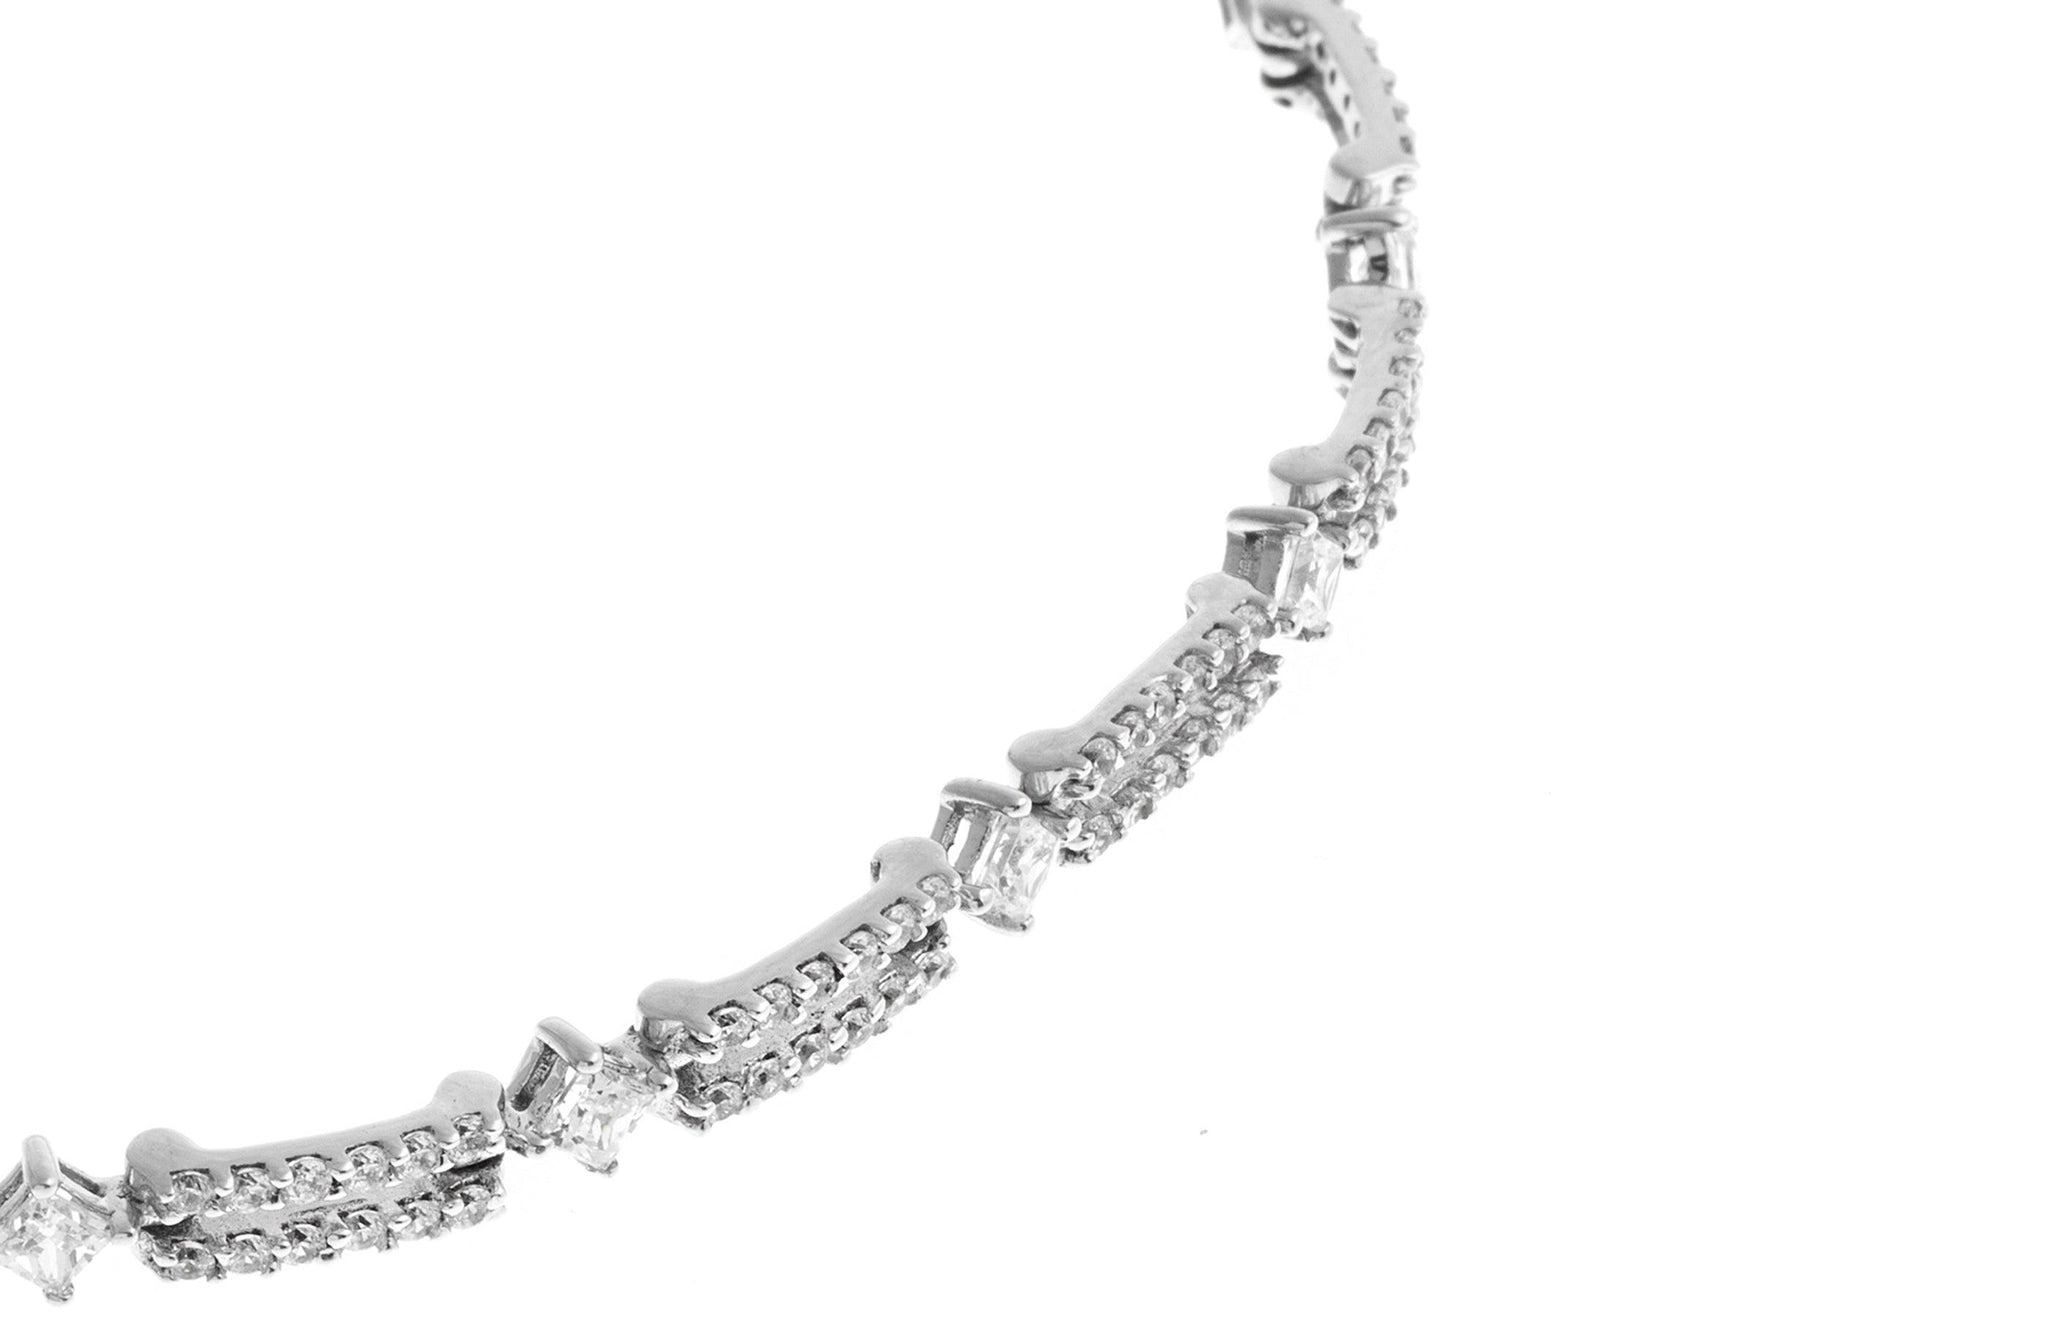 18ct White Gold Bracelet with Cubic Zirconia Stones (13.3g) LBR-1162